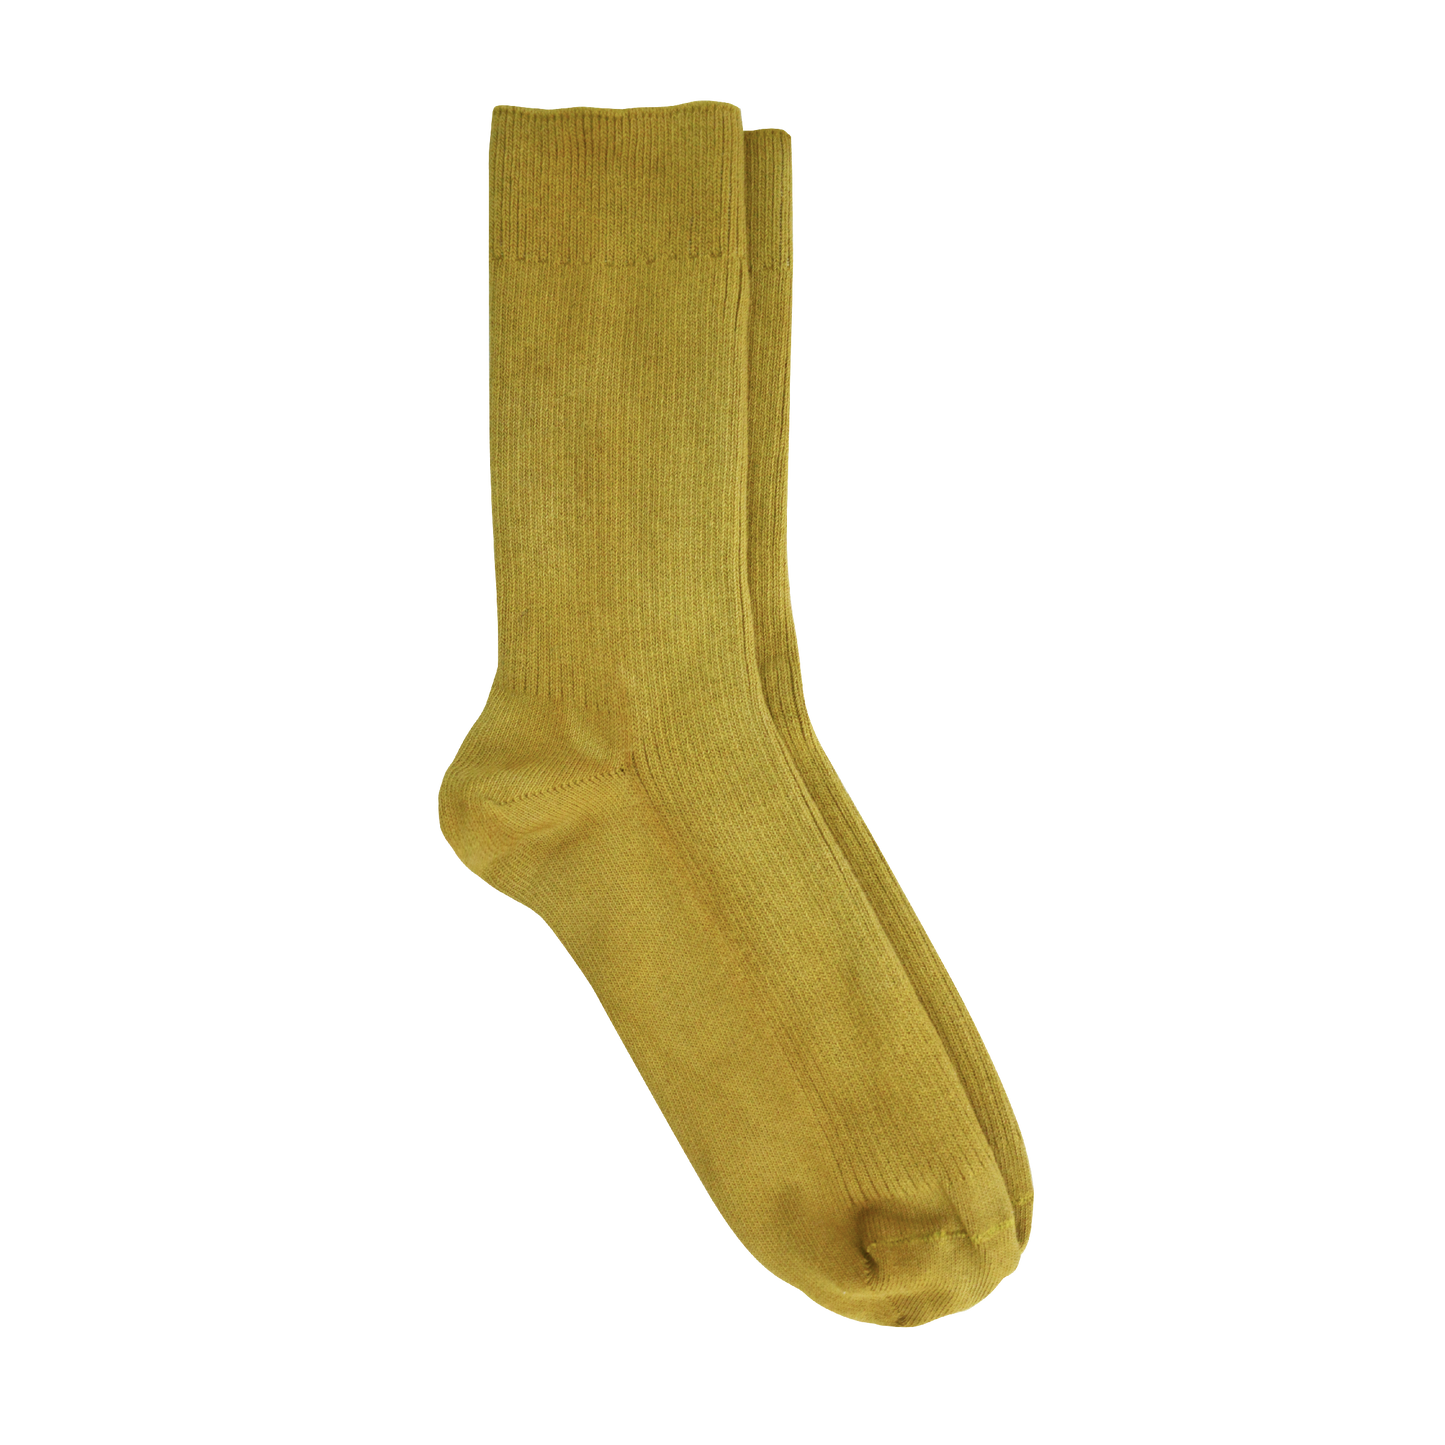 NATURAL HAND-DYED MANGO SOCKS - The Crowd Went Wild